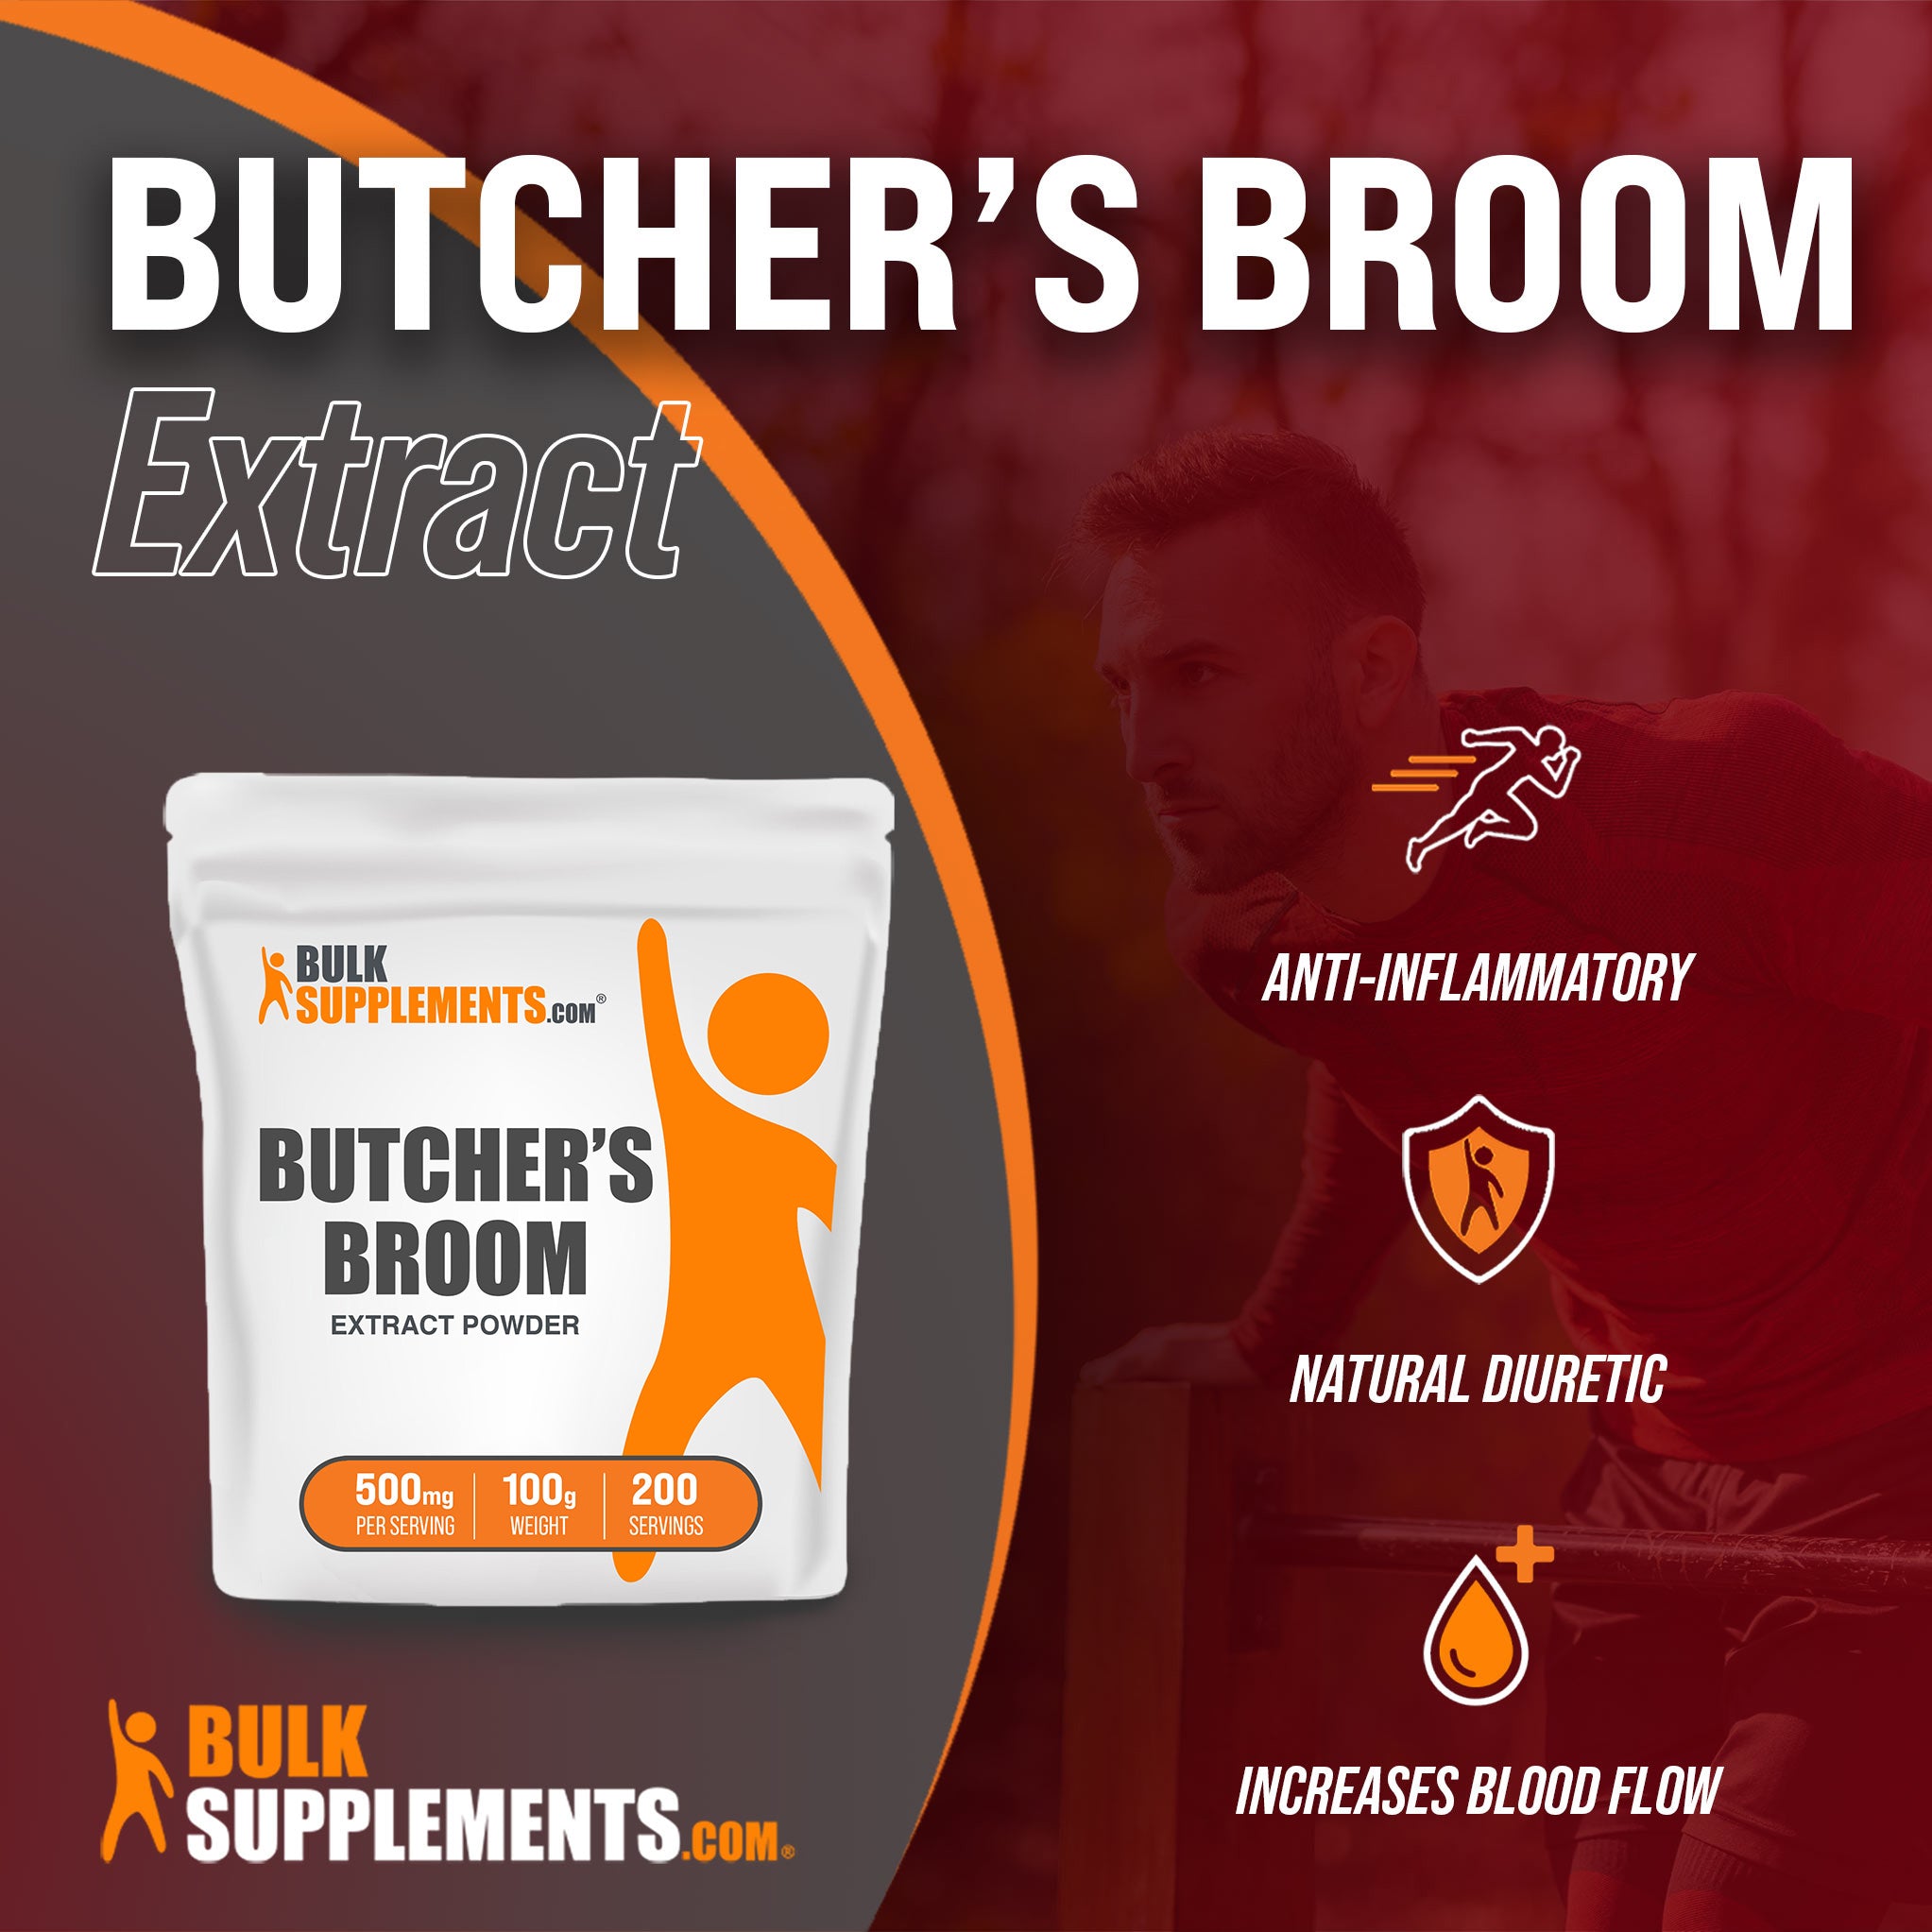 100g butcher's broom are your best circulation supplements